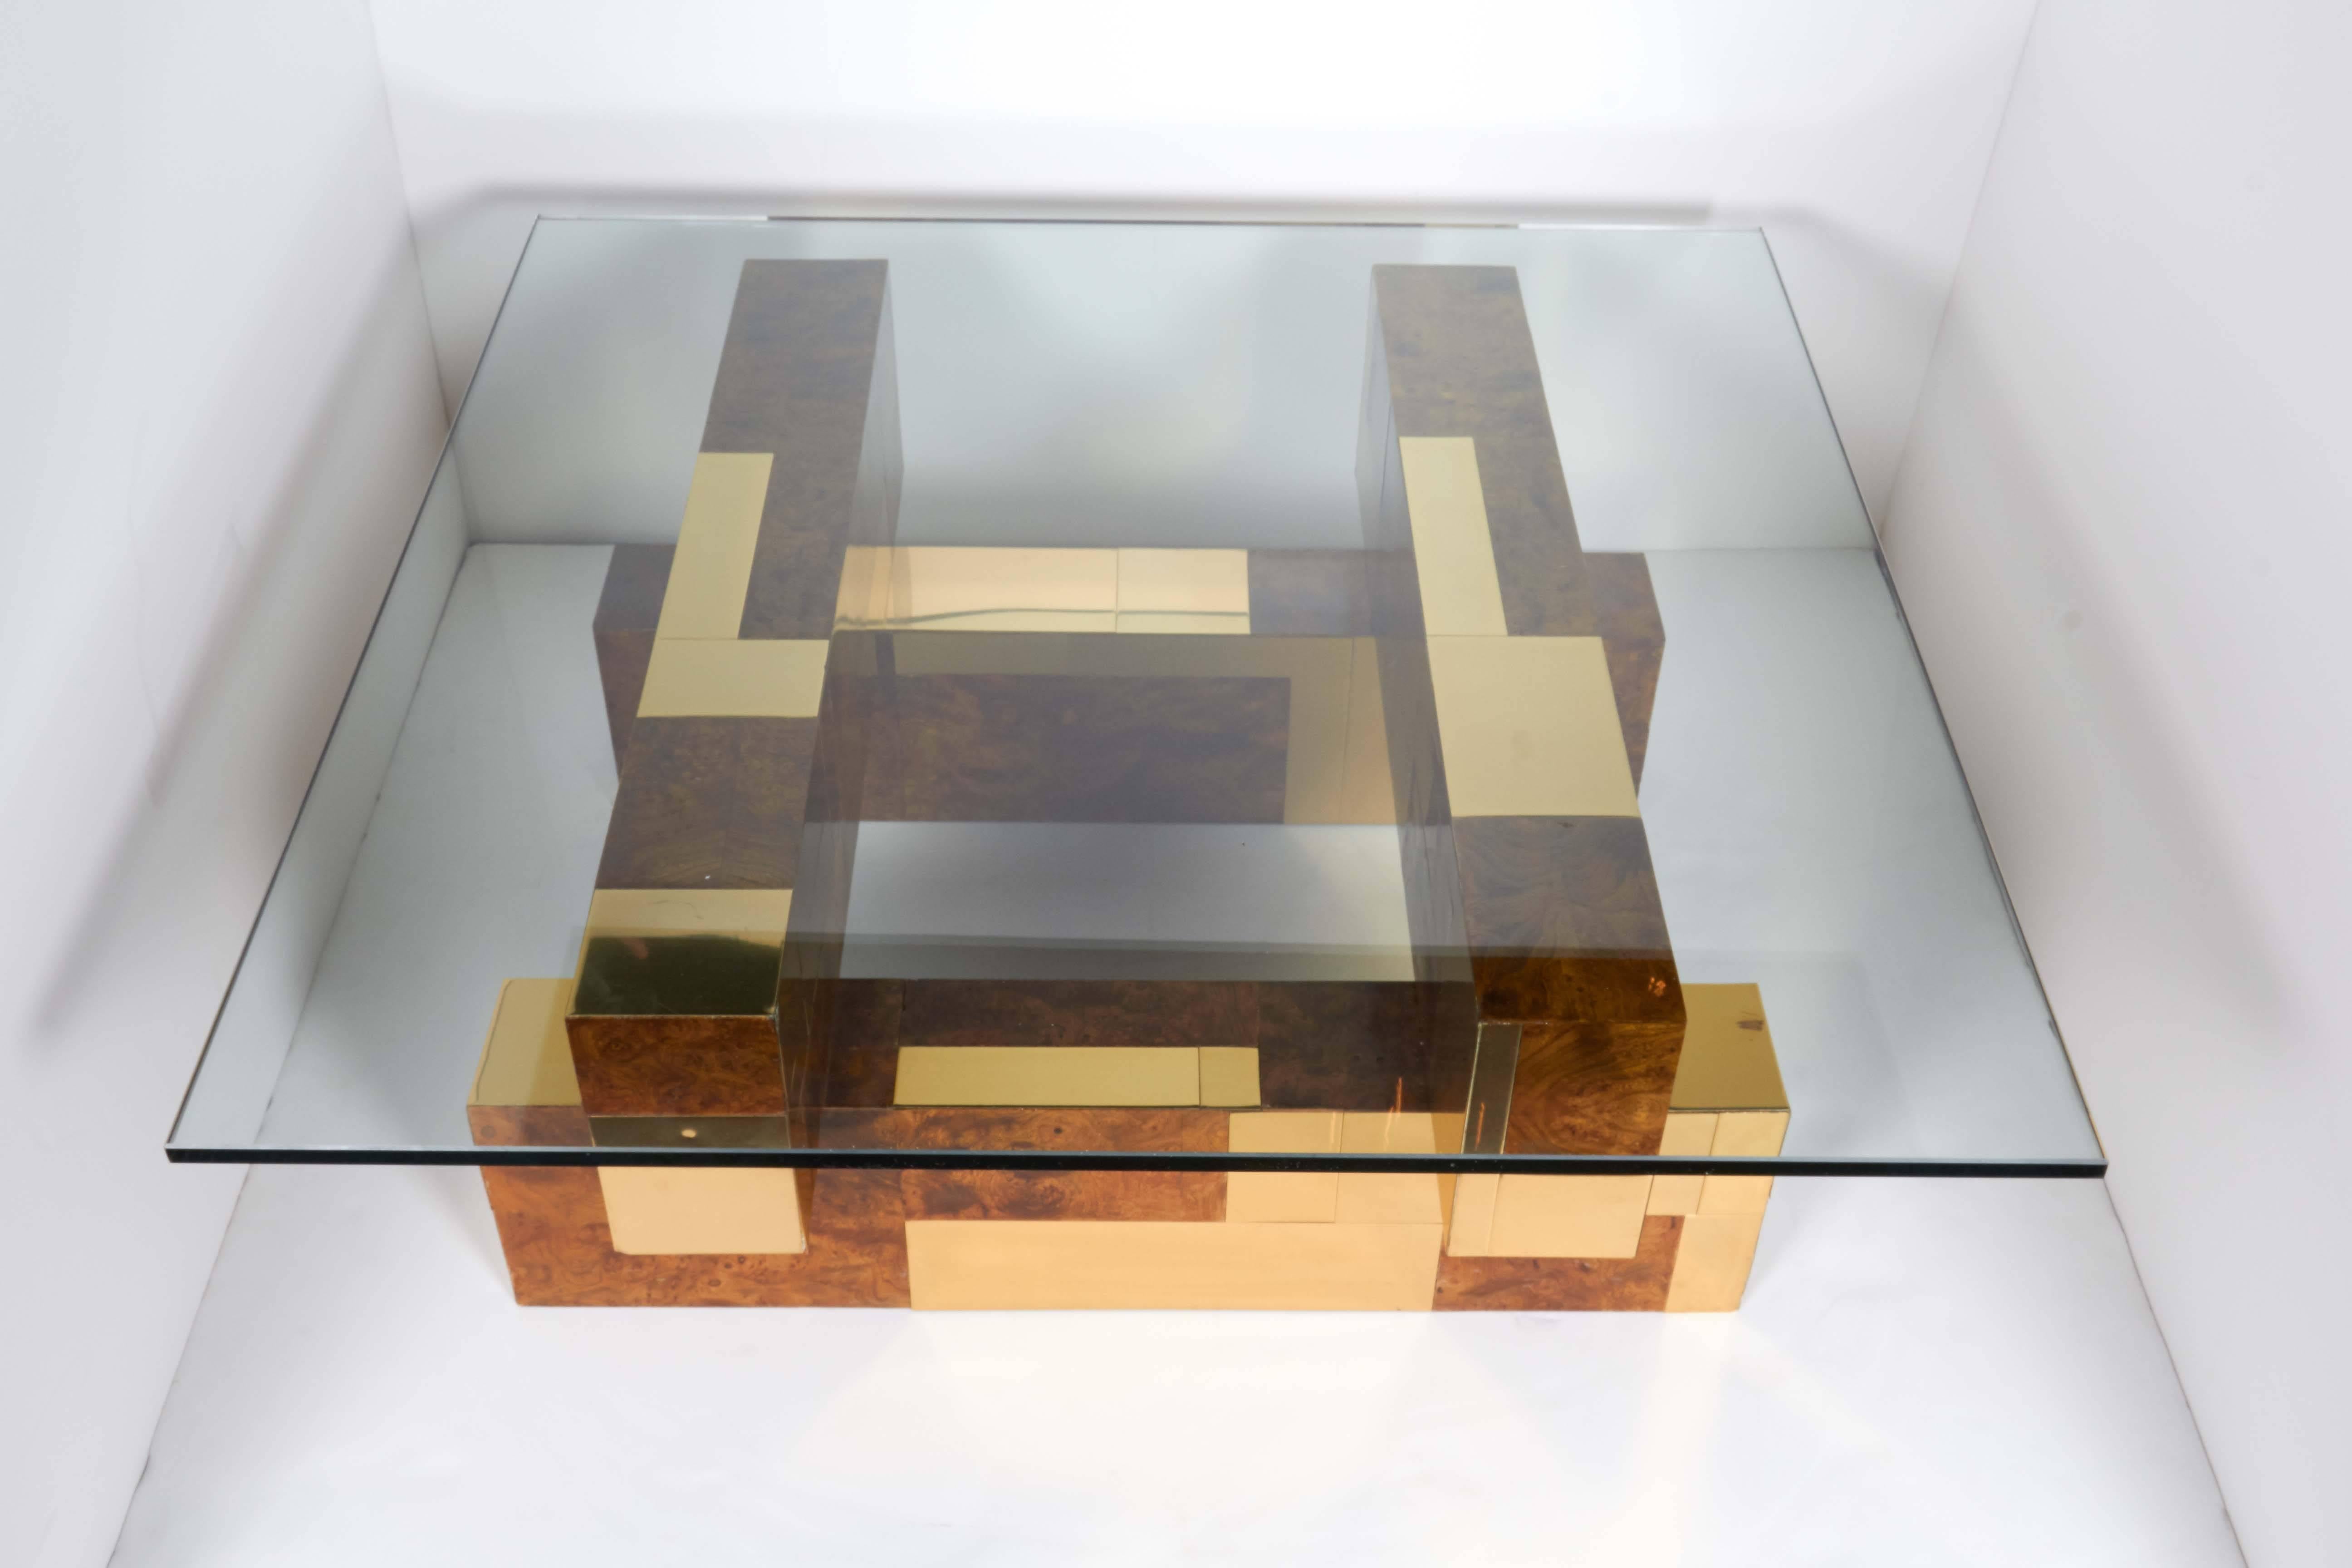 Mid-Century Modern coffee table from the Cityscape series by Paul Evans. Cubist form with rare patchwork design in burled wood veneer offset by striking brass insets. Has square glass top with polished edges.